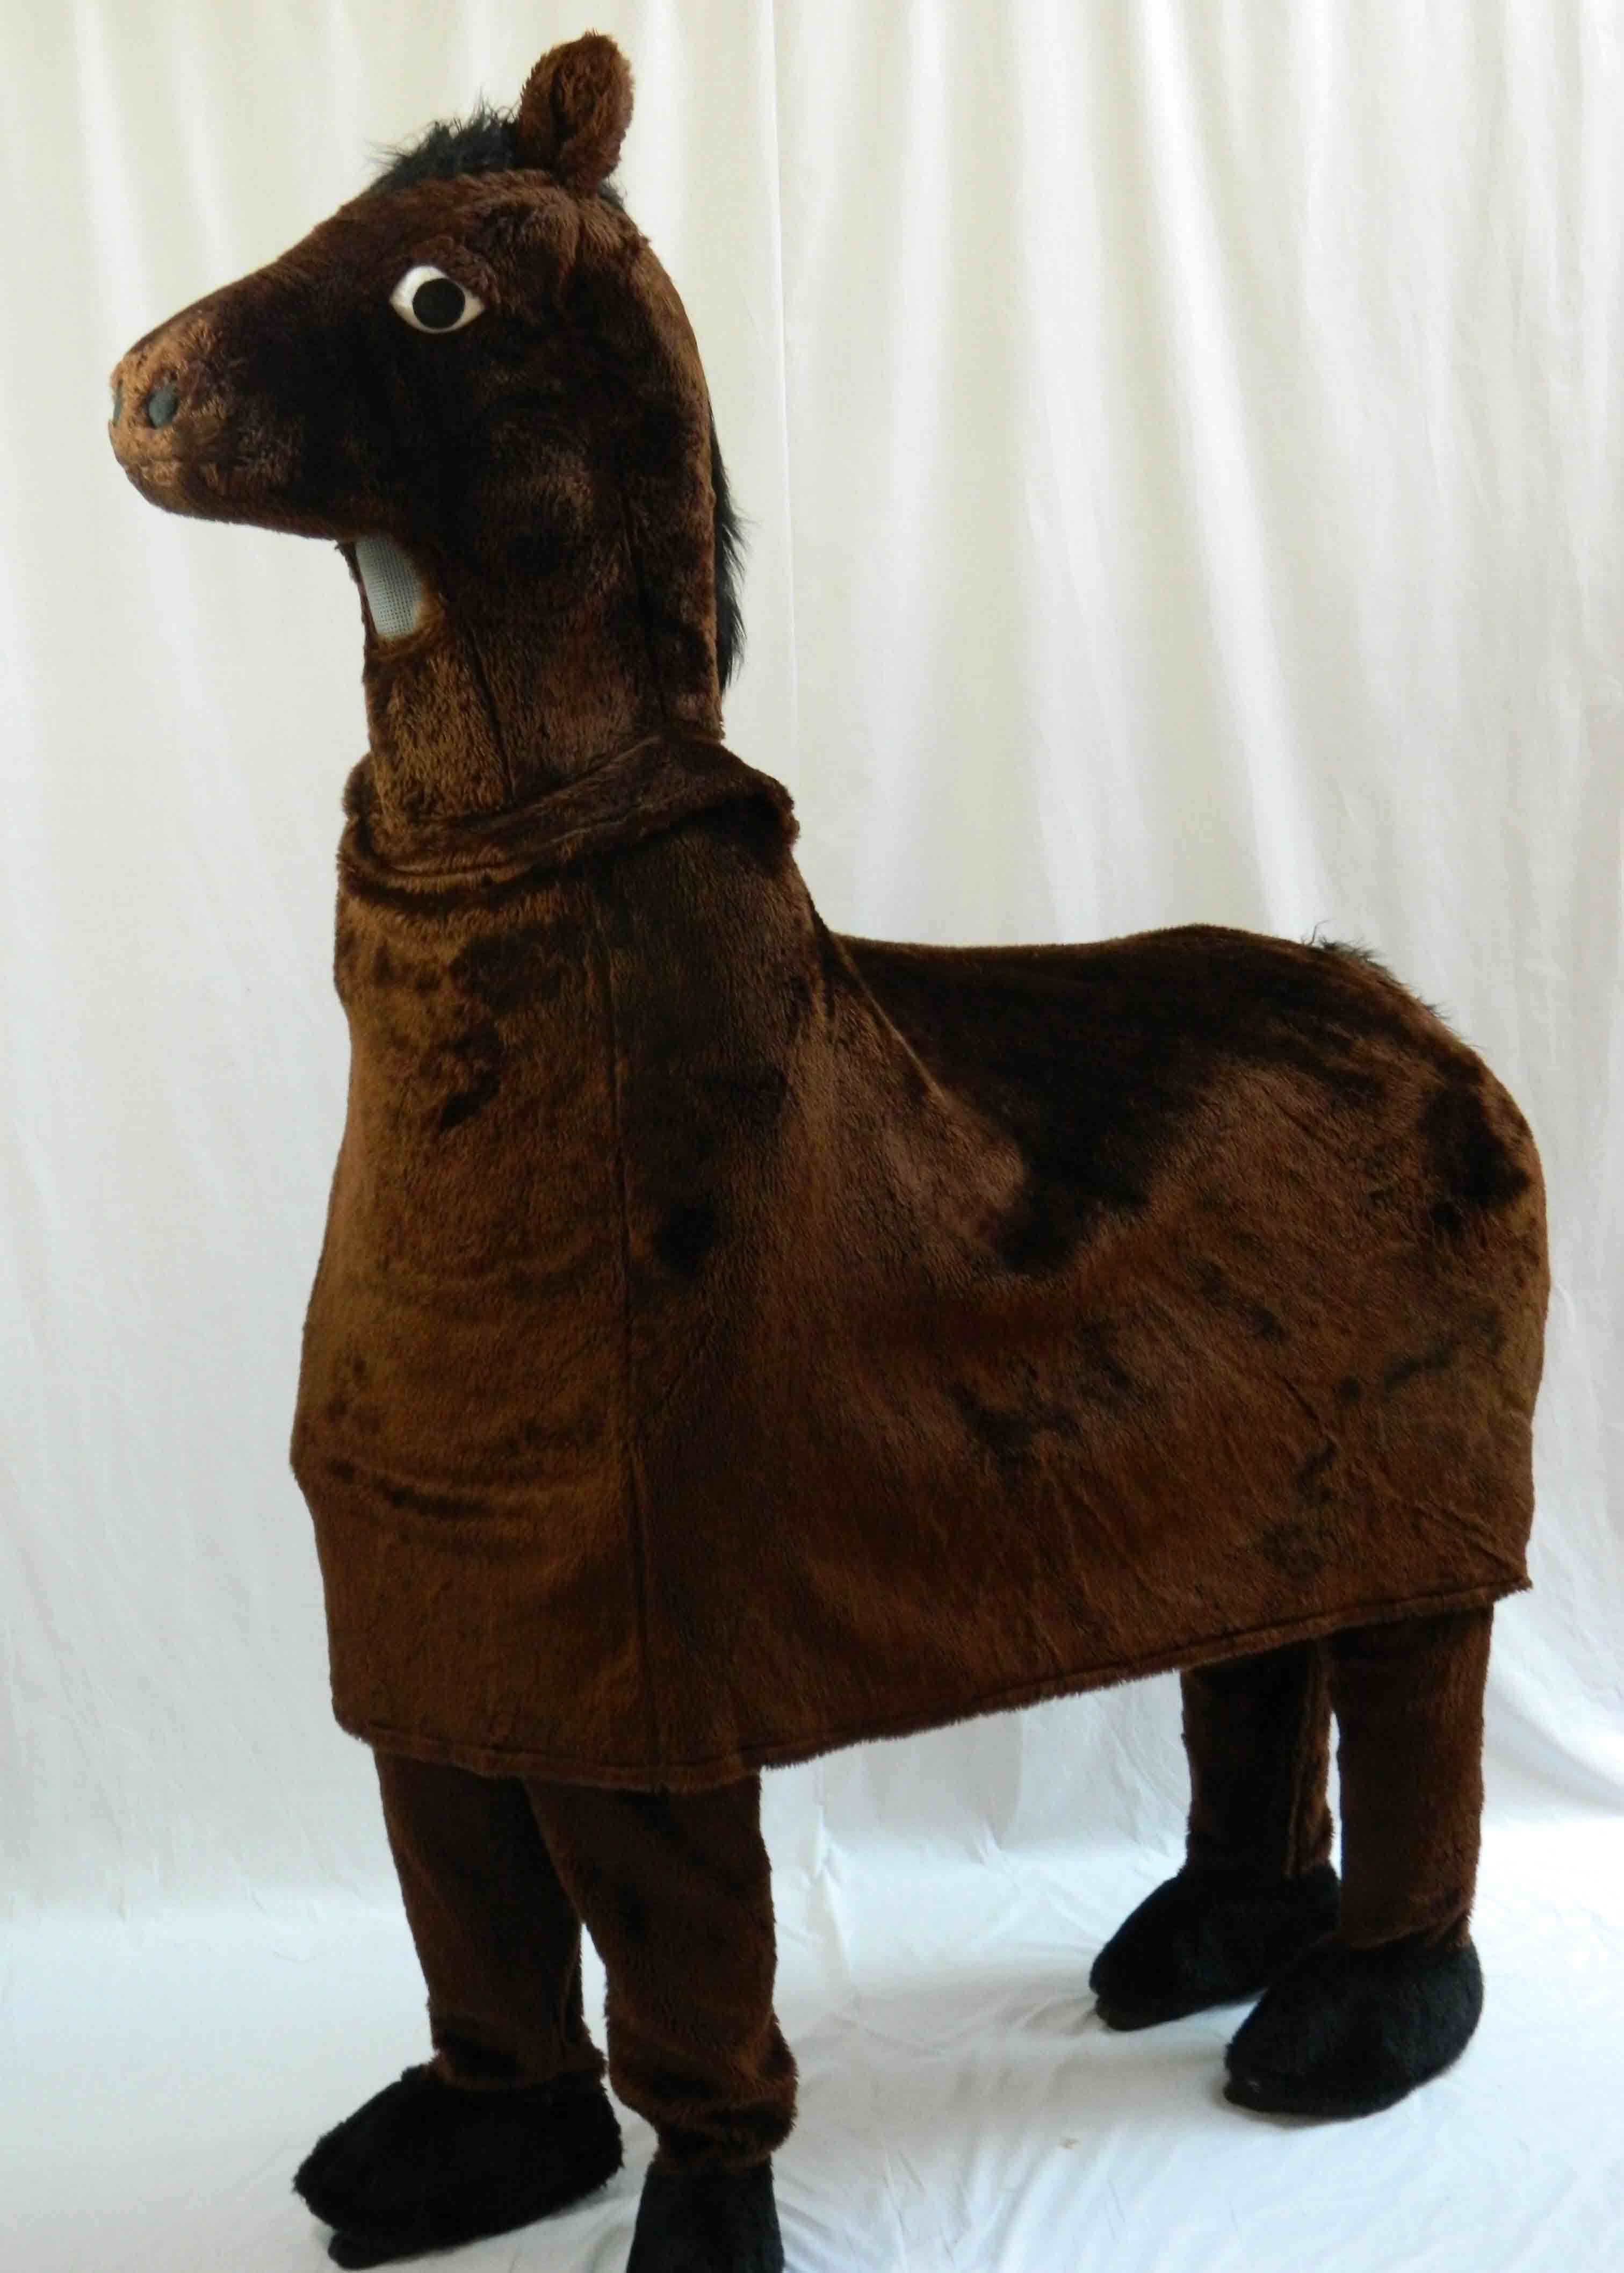 TWO-MAN pantomime horse costume